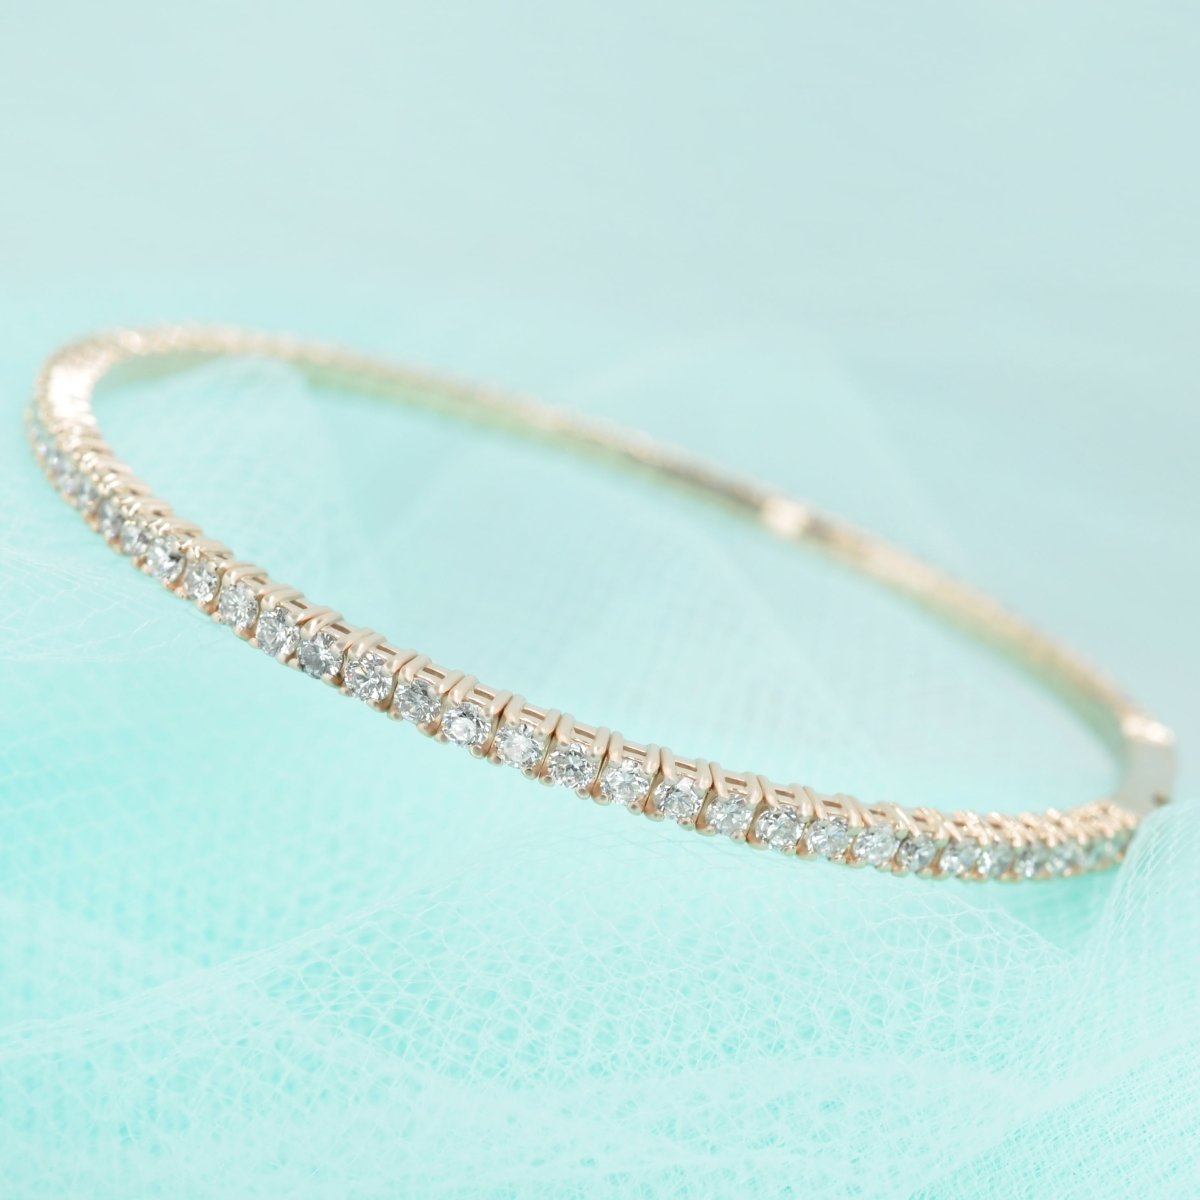 Radiant 2.50 CT Round Cut Diamond Flexible Bangle in 14KT Rose Gold - Primestyle.com